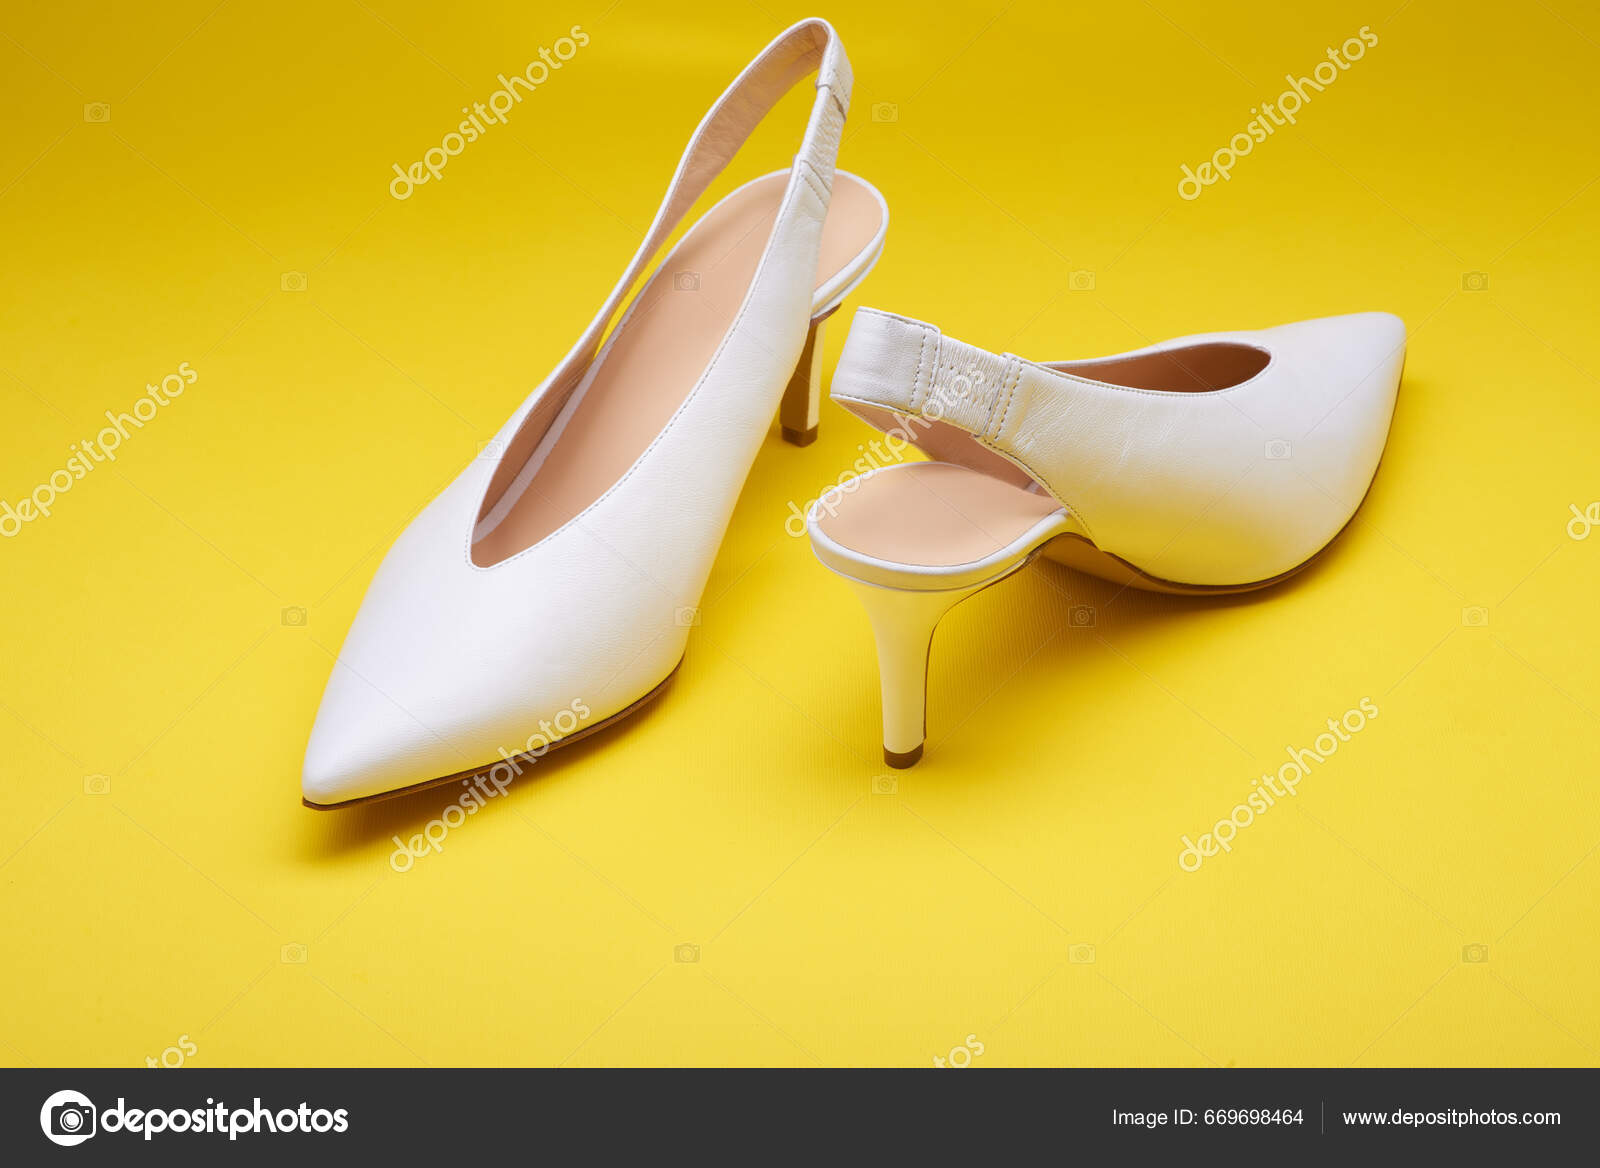 High Heels Brown Stock Photos and Images - 123RF